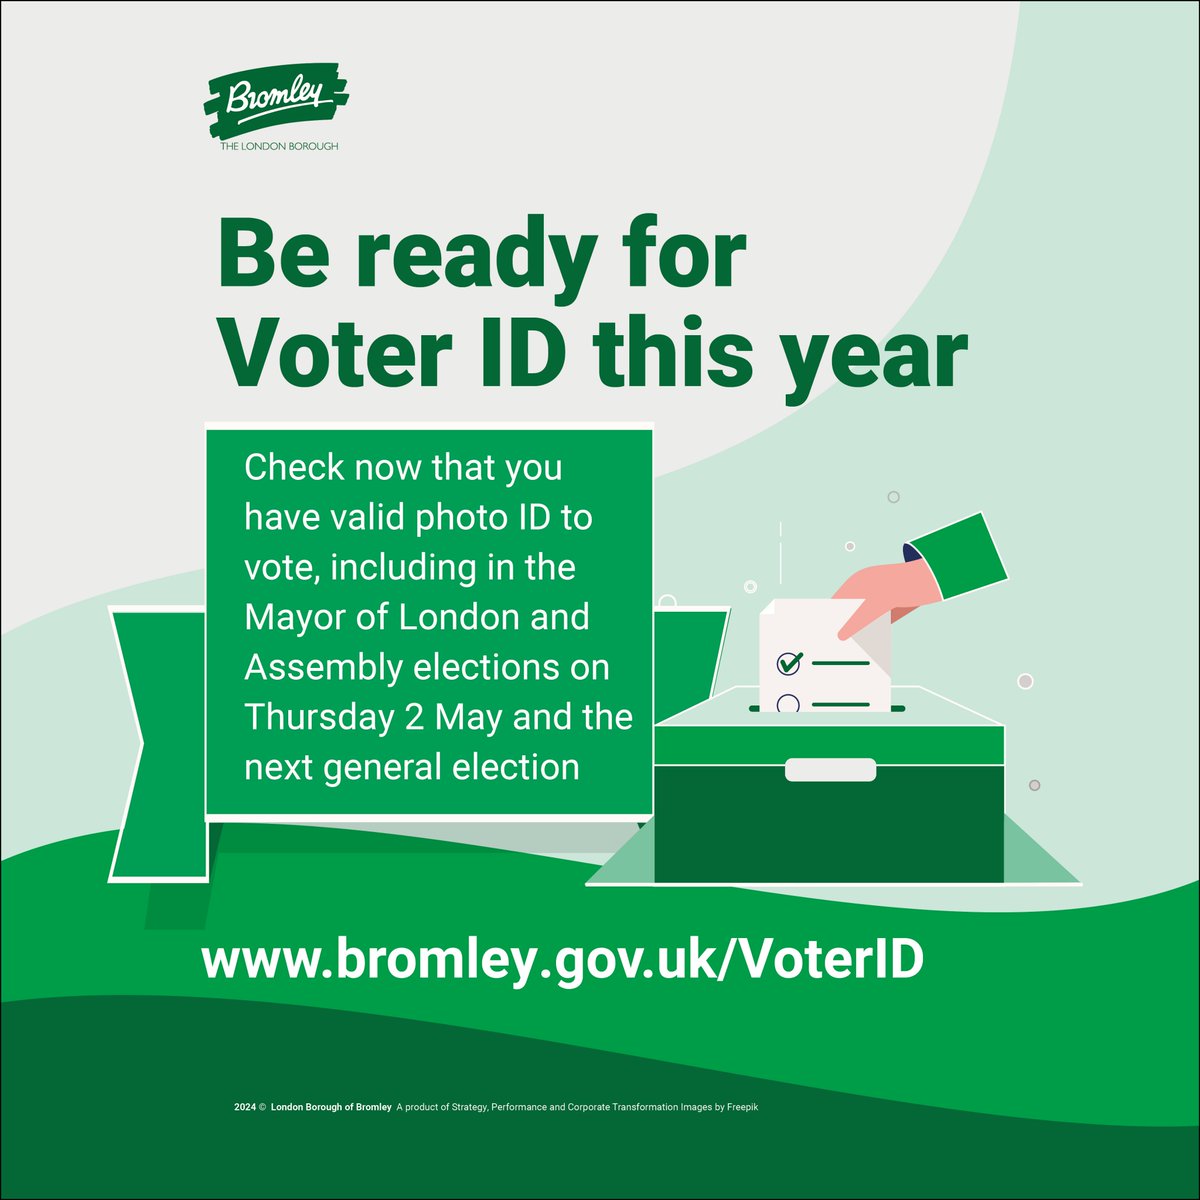 Last chance to register to vote for the London elections on 2 May ahead of tomorrow's deadline (16 April). Voters must be registered and bring voter ID to vote for London Mayor and Assembly members, with more information at bromley.gov.uk/GLAElections. #LondonVotes